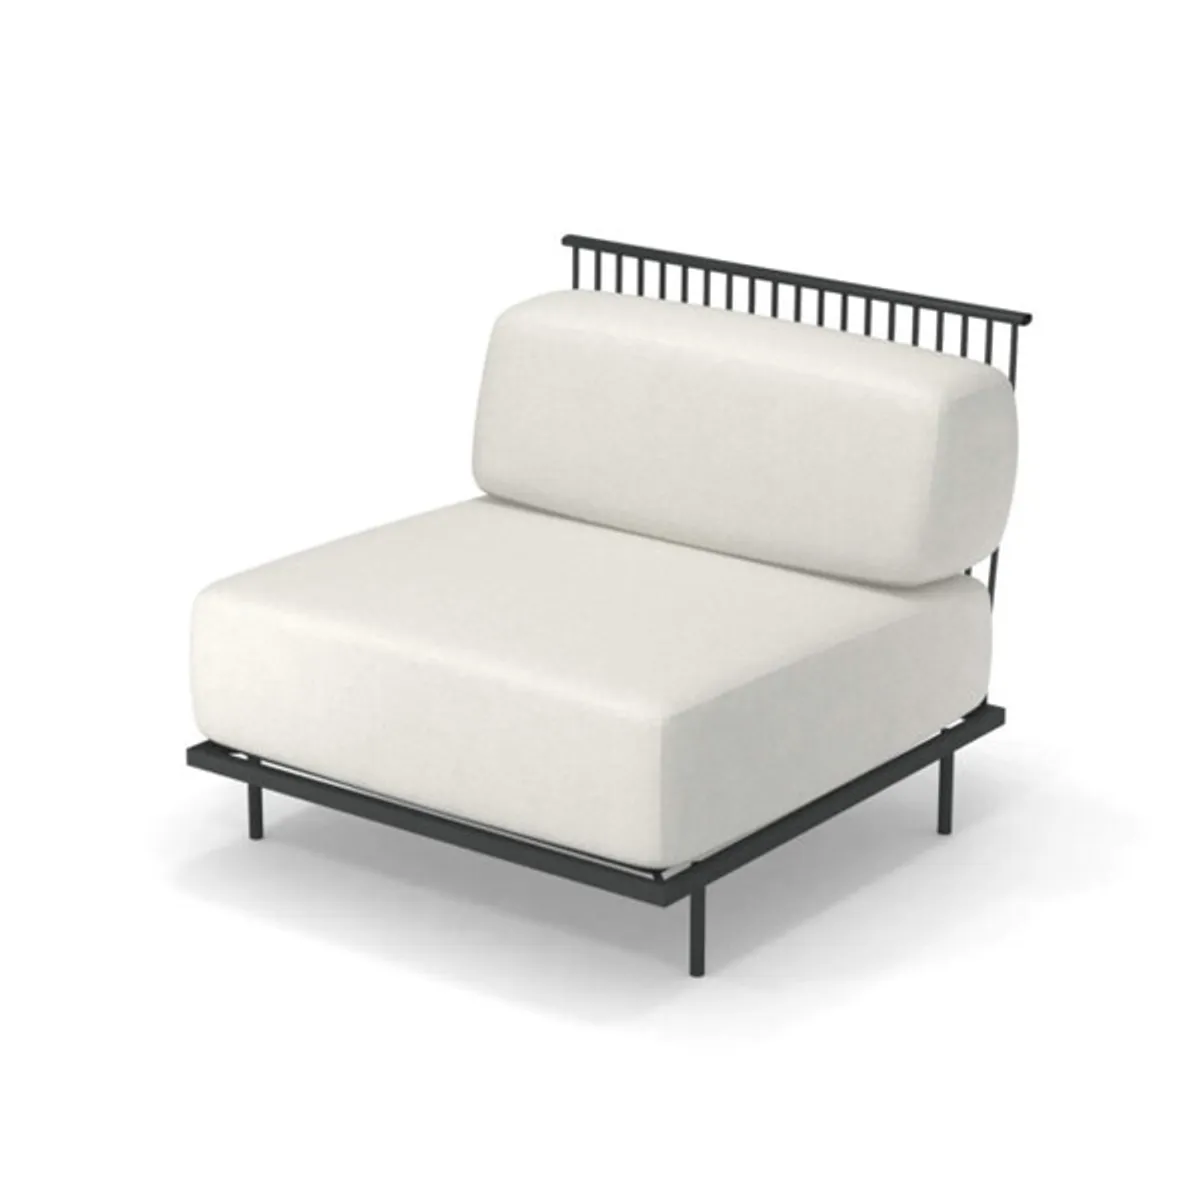 Cannole modular sofa Inside Out Contracts10